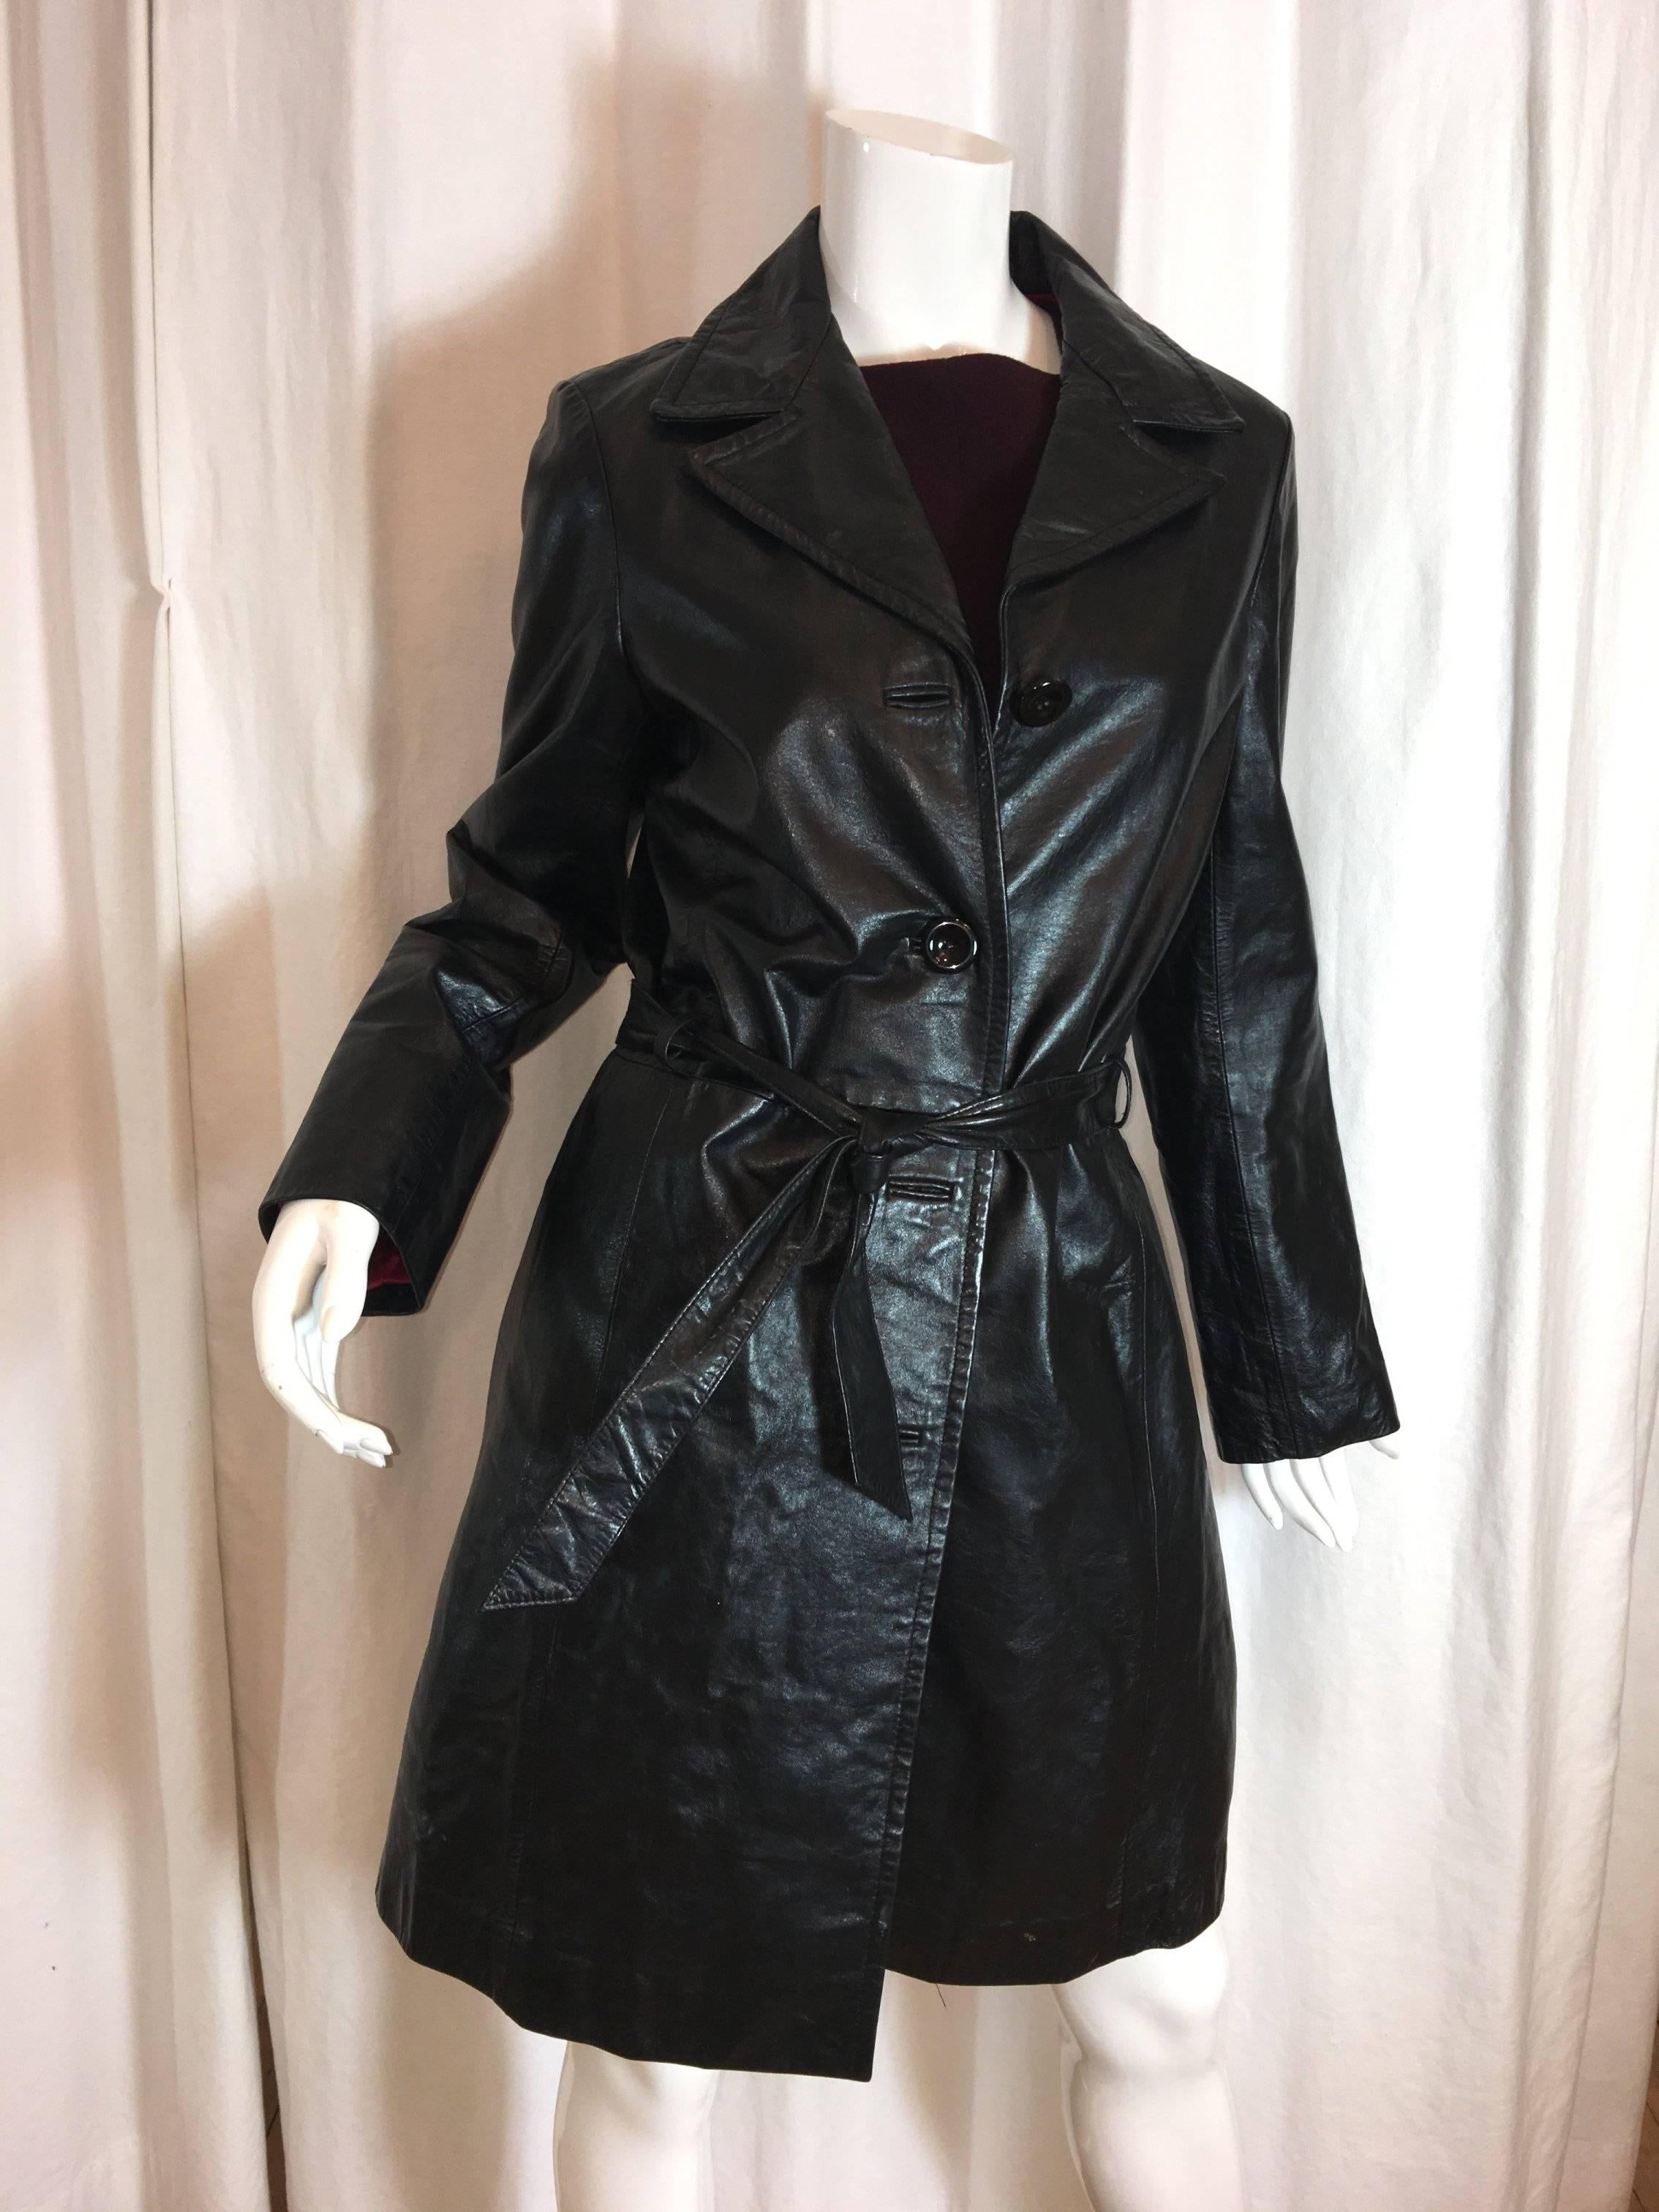 Katayoni Adeli Black Leather Belted Coat with Red Lining. Four Button Front with one missing. 